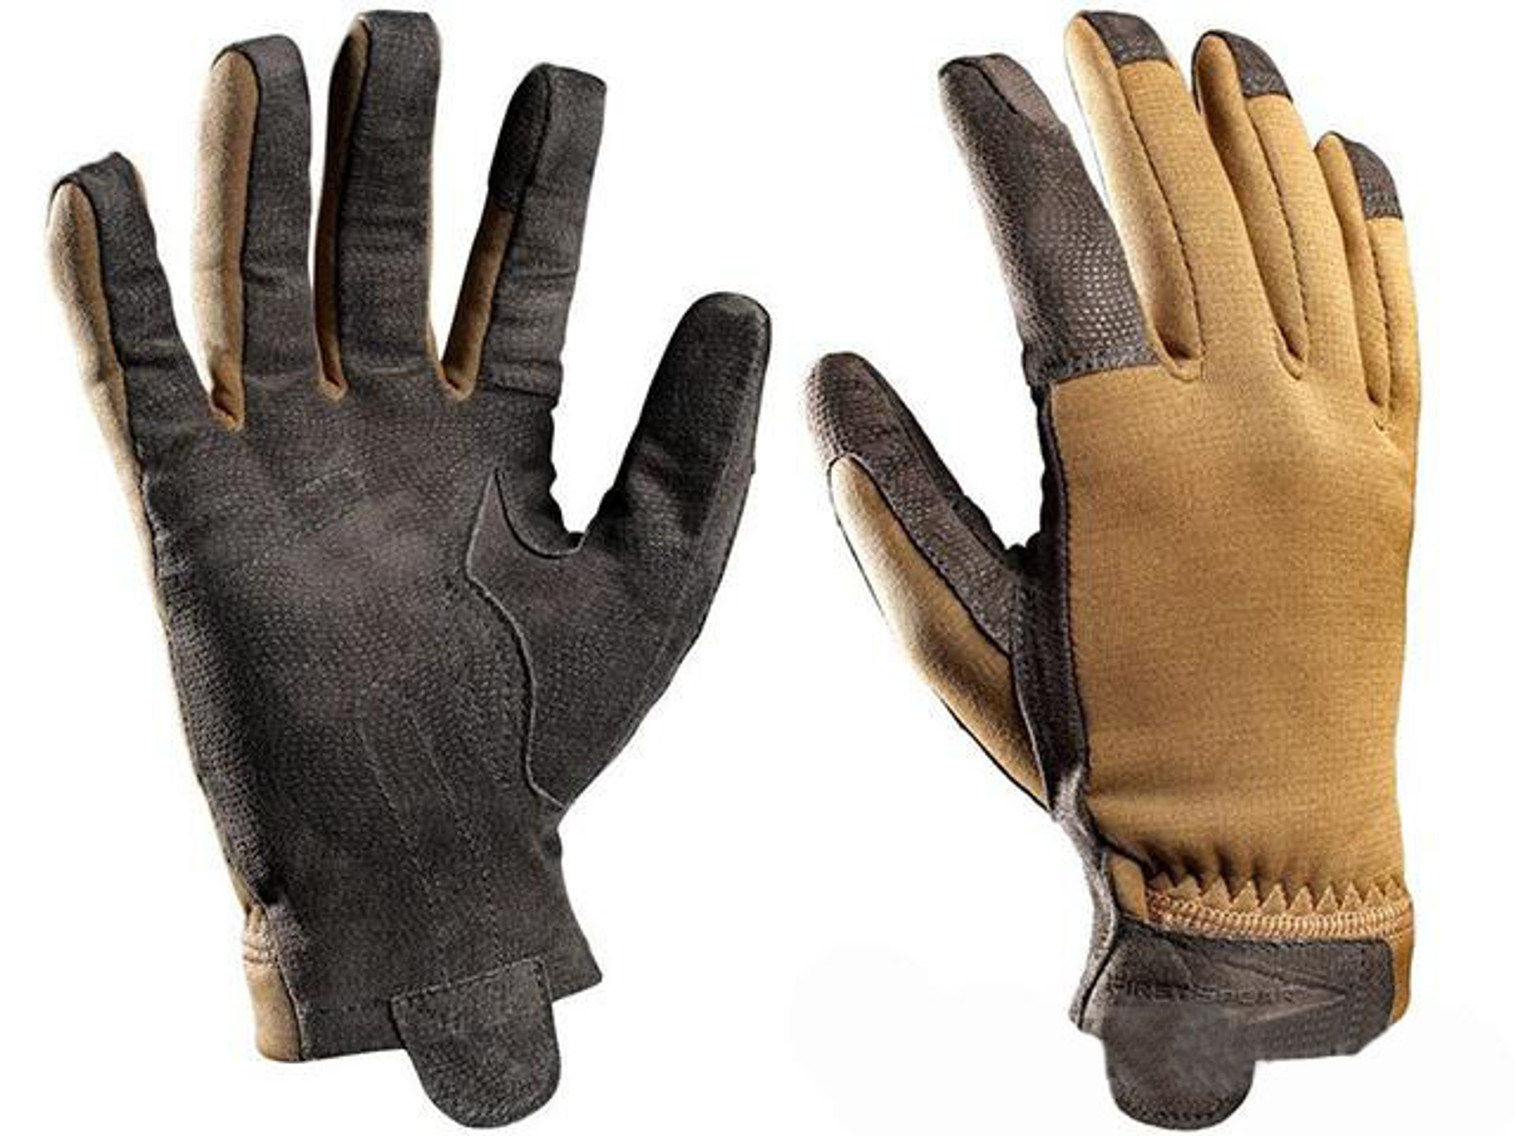 FirstSpear Multi Climate Glove (Color: Coyote)